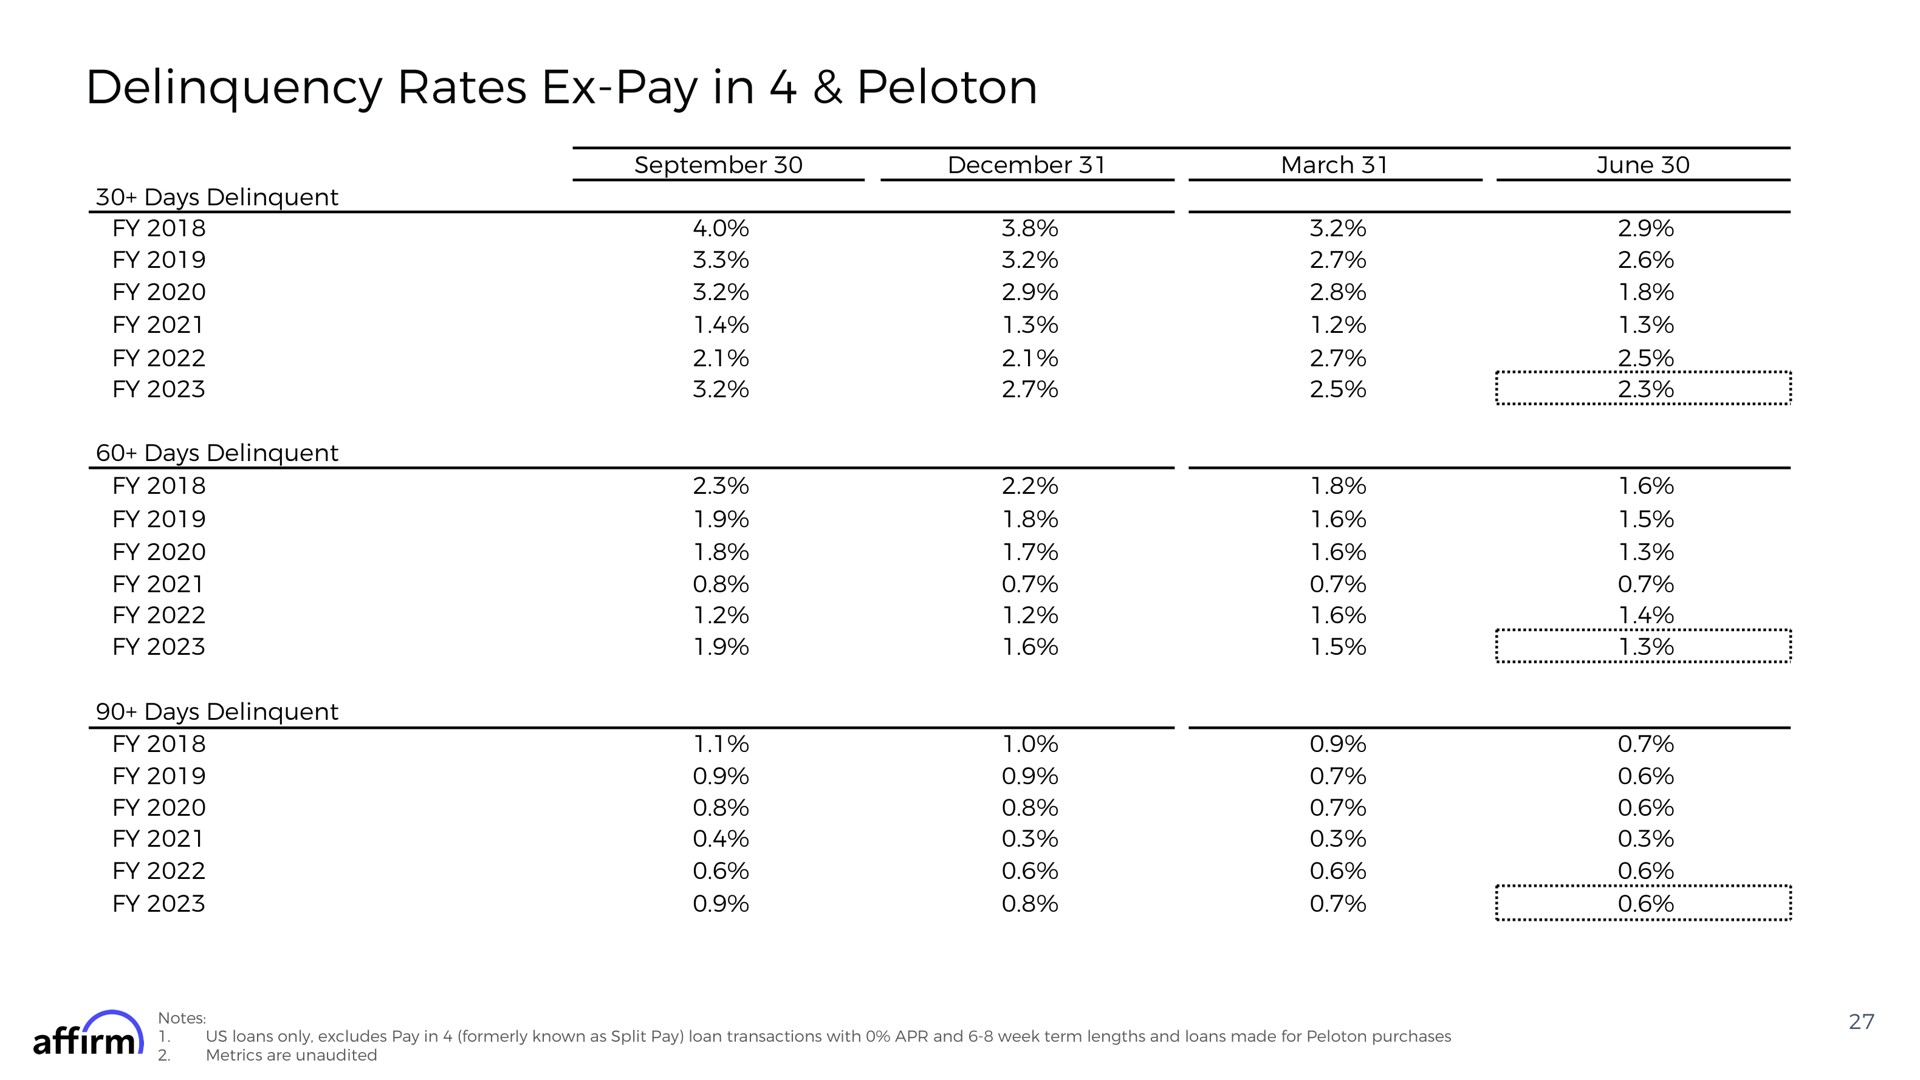 delinquency rates pay in peloton do am | Affirm